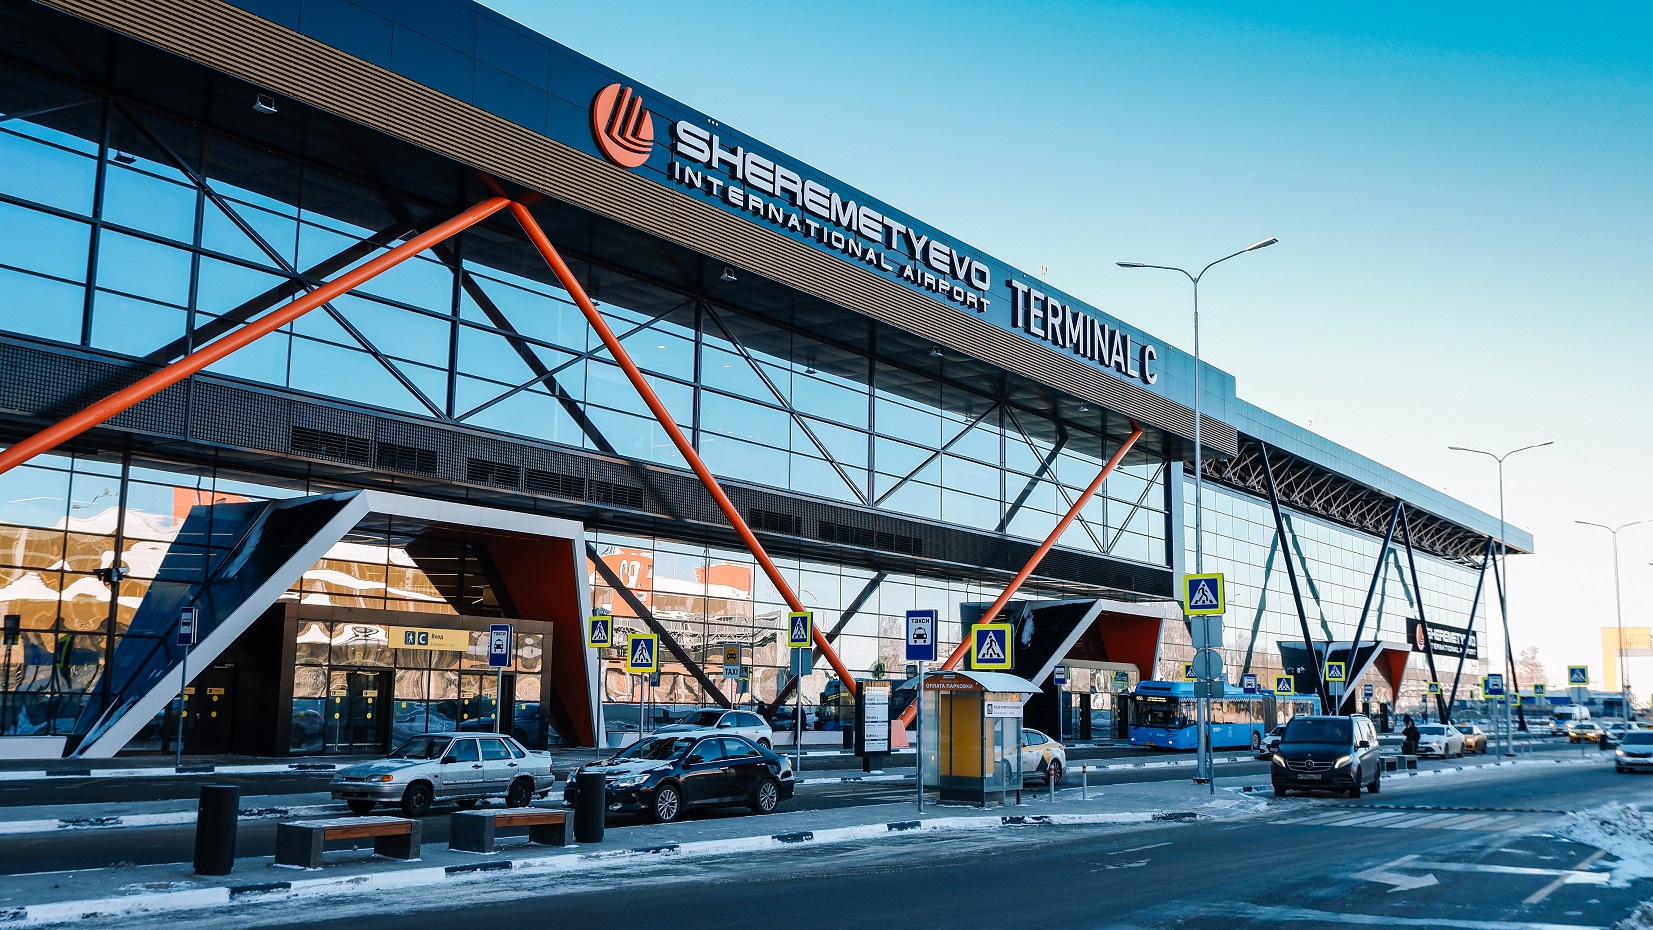 Etihad Airways Announces Move To Moscow’s Sheremetyevo International Airport, Supported By Partnership With Aeroflot